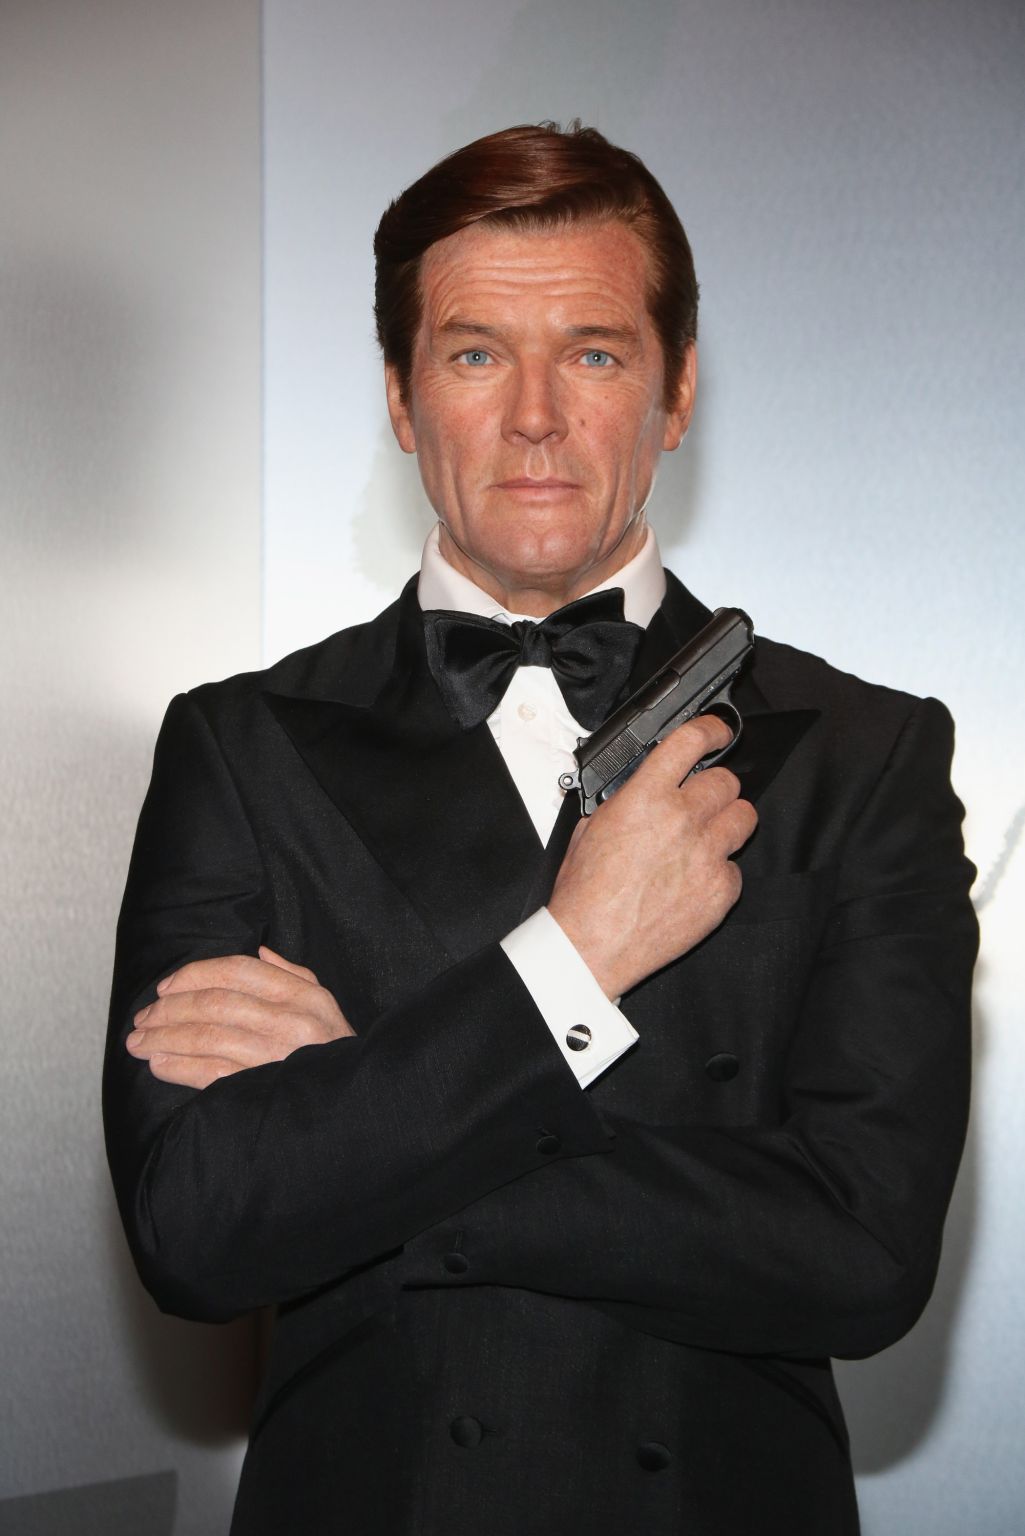 007 Actor Roger Moore Passes Away | The Light 103.9 FM